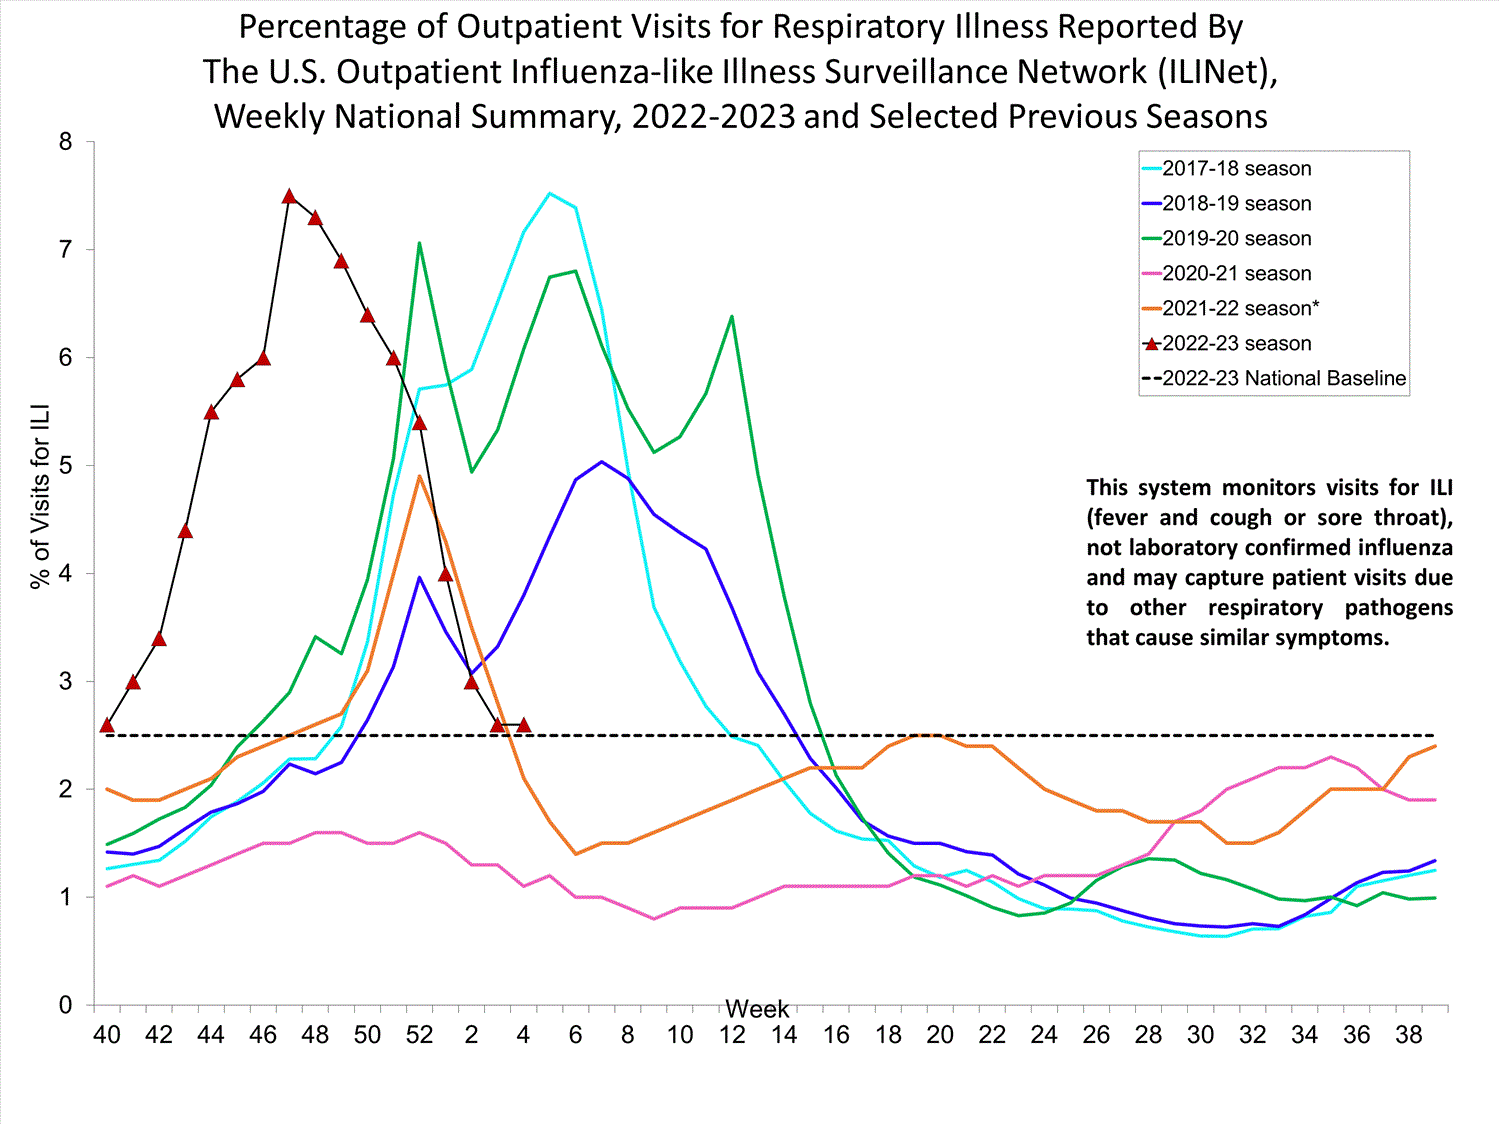 Percentage of outpatient visits for respiratory illness reported by the U.S. Outpatient Influenza-like Ilnness Surveillance Network Weekly National summary, 2022-2023 and Selected Previous Seasons.